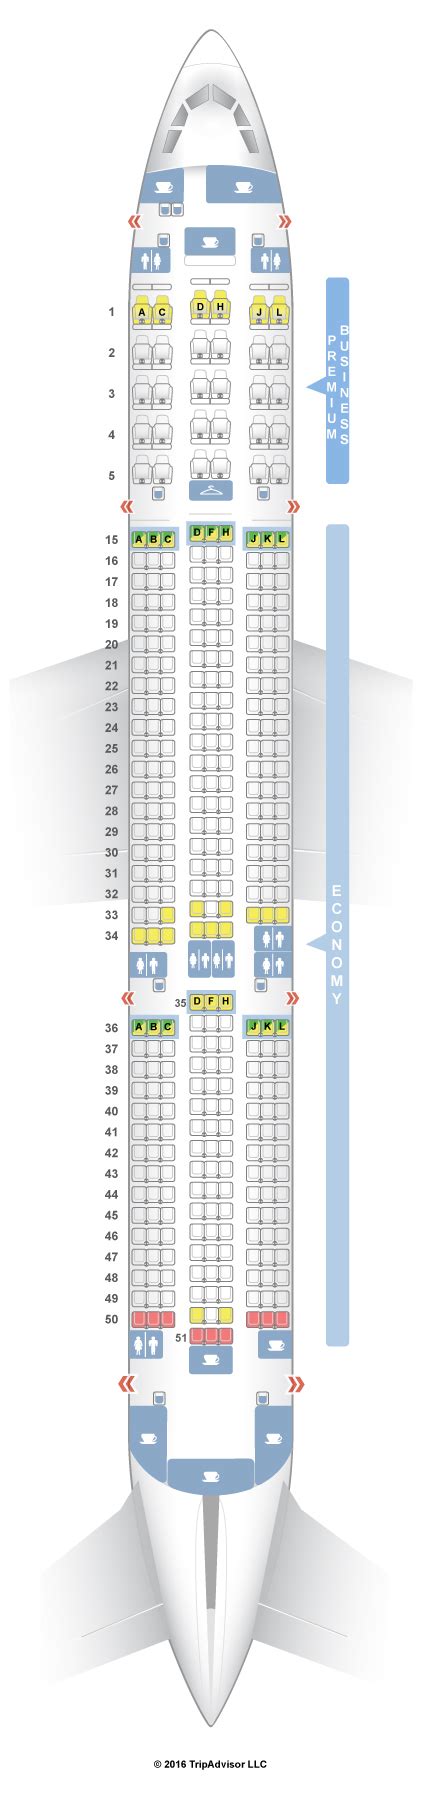 A350 900 Seat Map Maping Resources